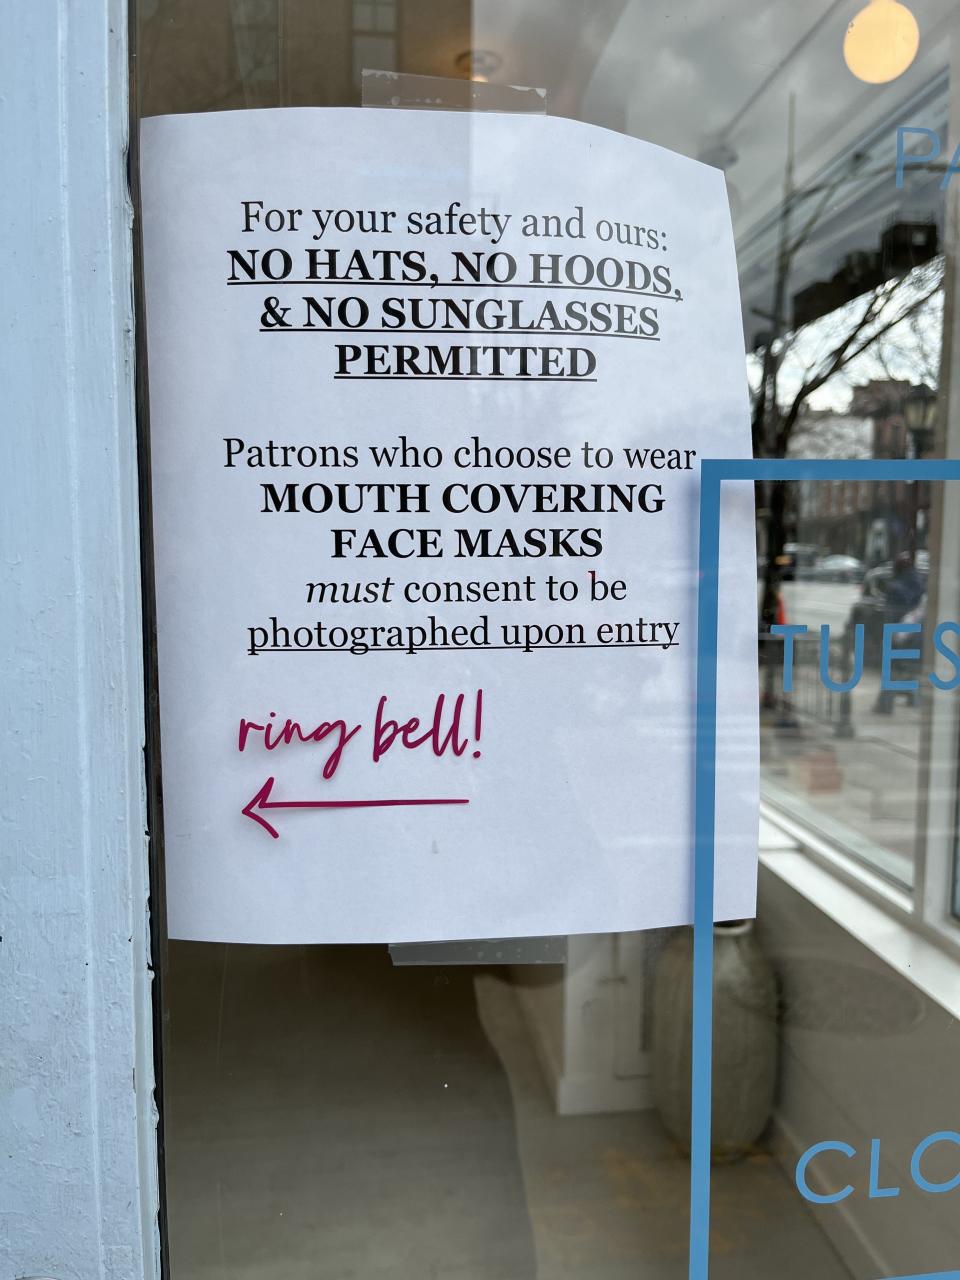 After a robbery at Melissa Joy Manning’s store and a concerning exchange with a shopper in her own store, Page Sargisson posted this sign outside of her Brooklyn store.